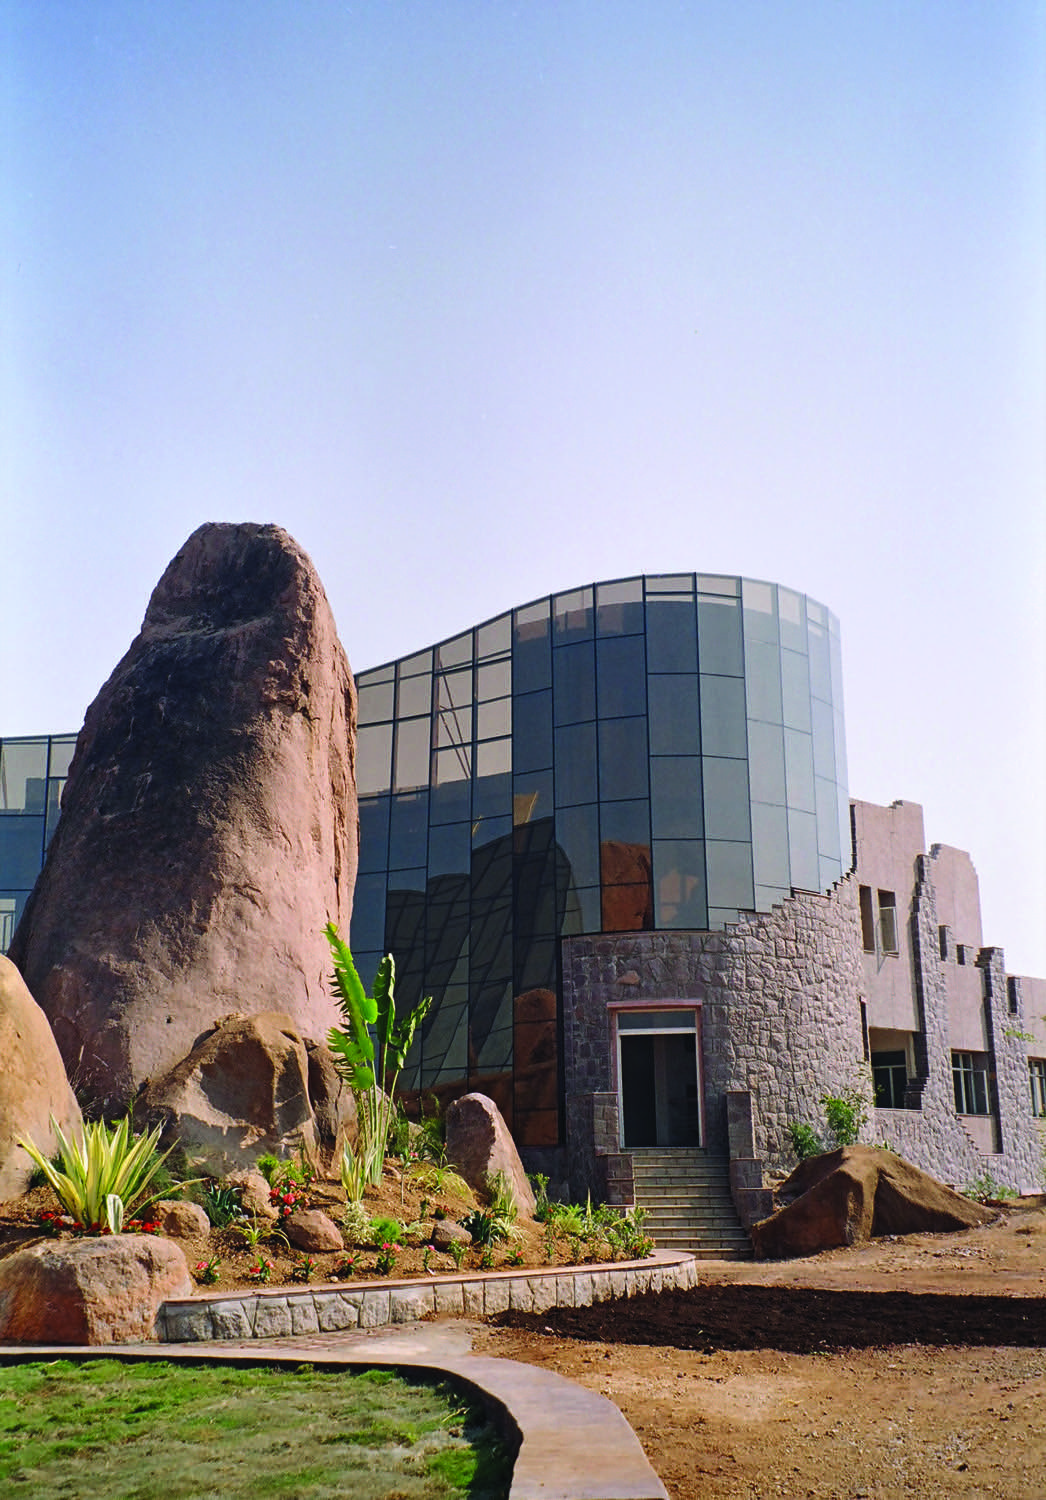 Laboratory for the Conservation of Endangered Species, Hyderabad, Shirish Beri